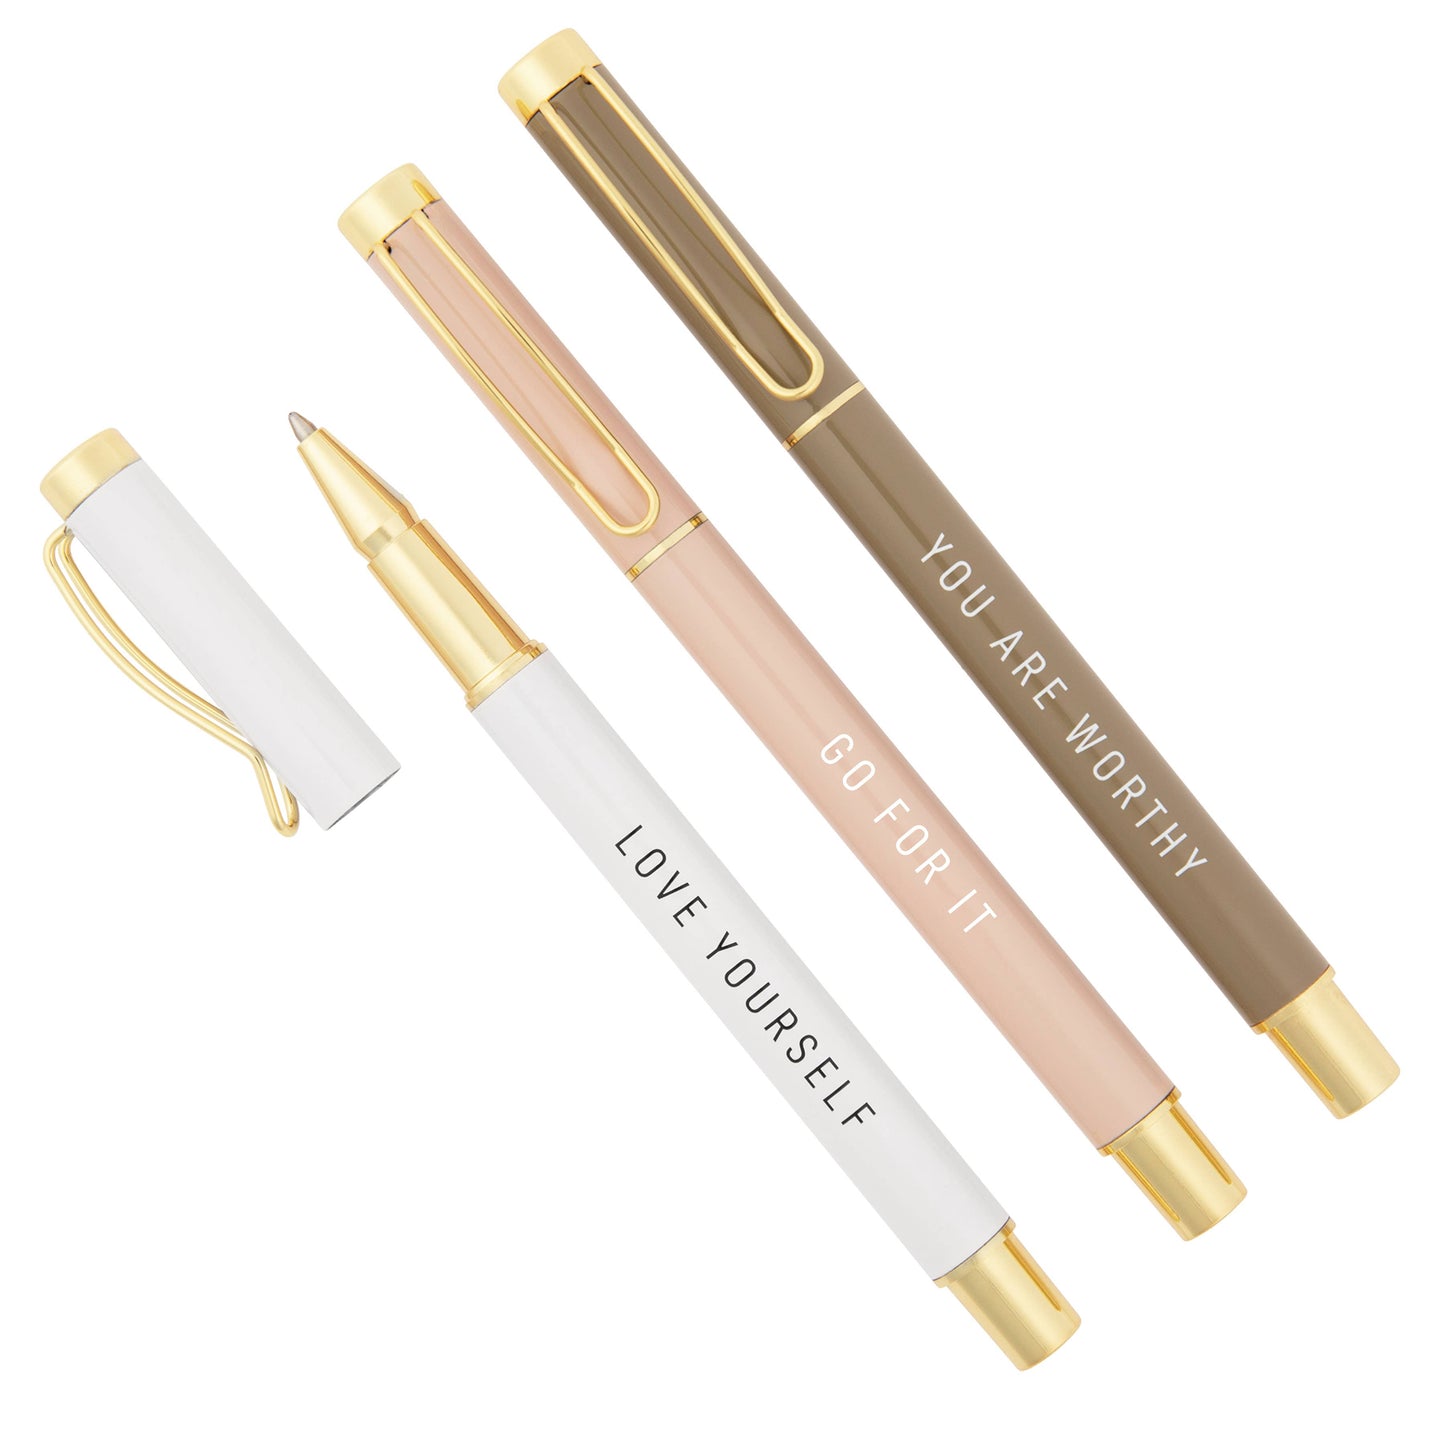 Go For It Metal Pen Set - Home Decor & Gifts